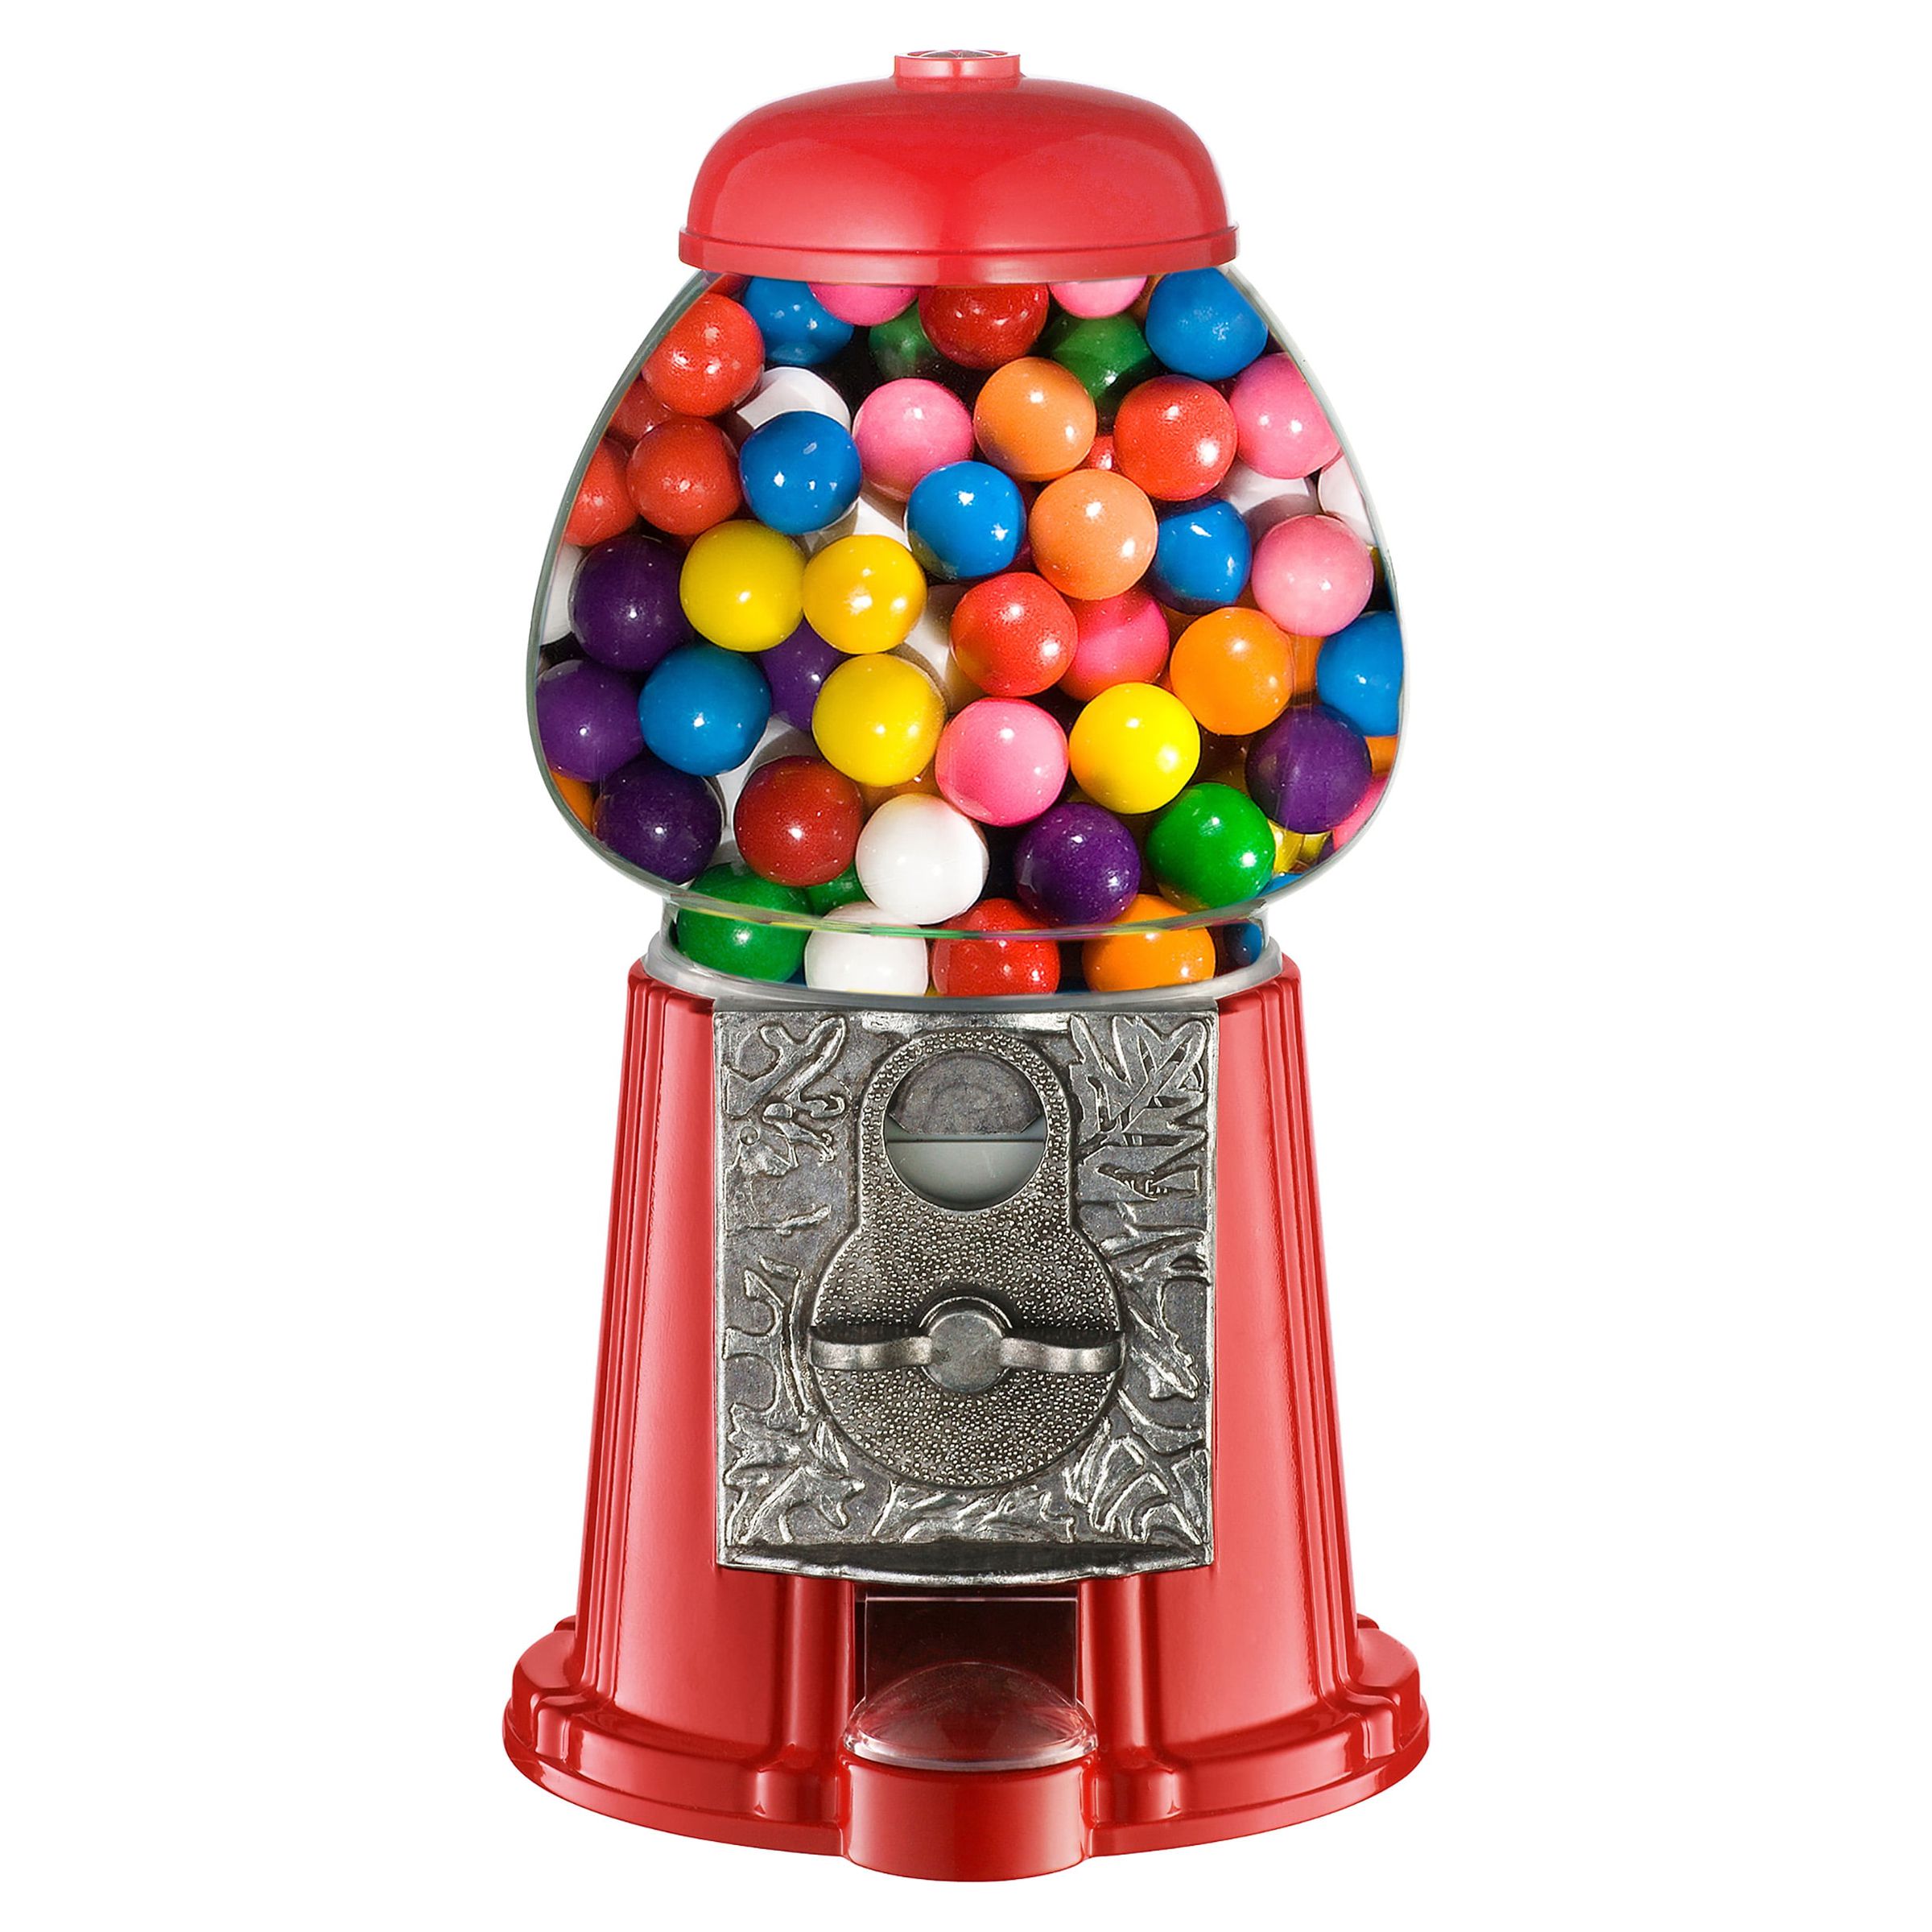 Great Northern 11" Junior Vintage Old Fashioned Candy Gumball Machine Bank Toy - Everyone Loves Gumballs! - image 1 of 7